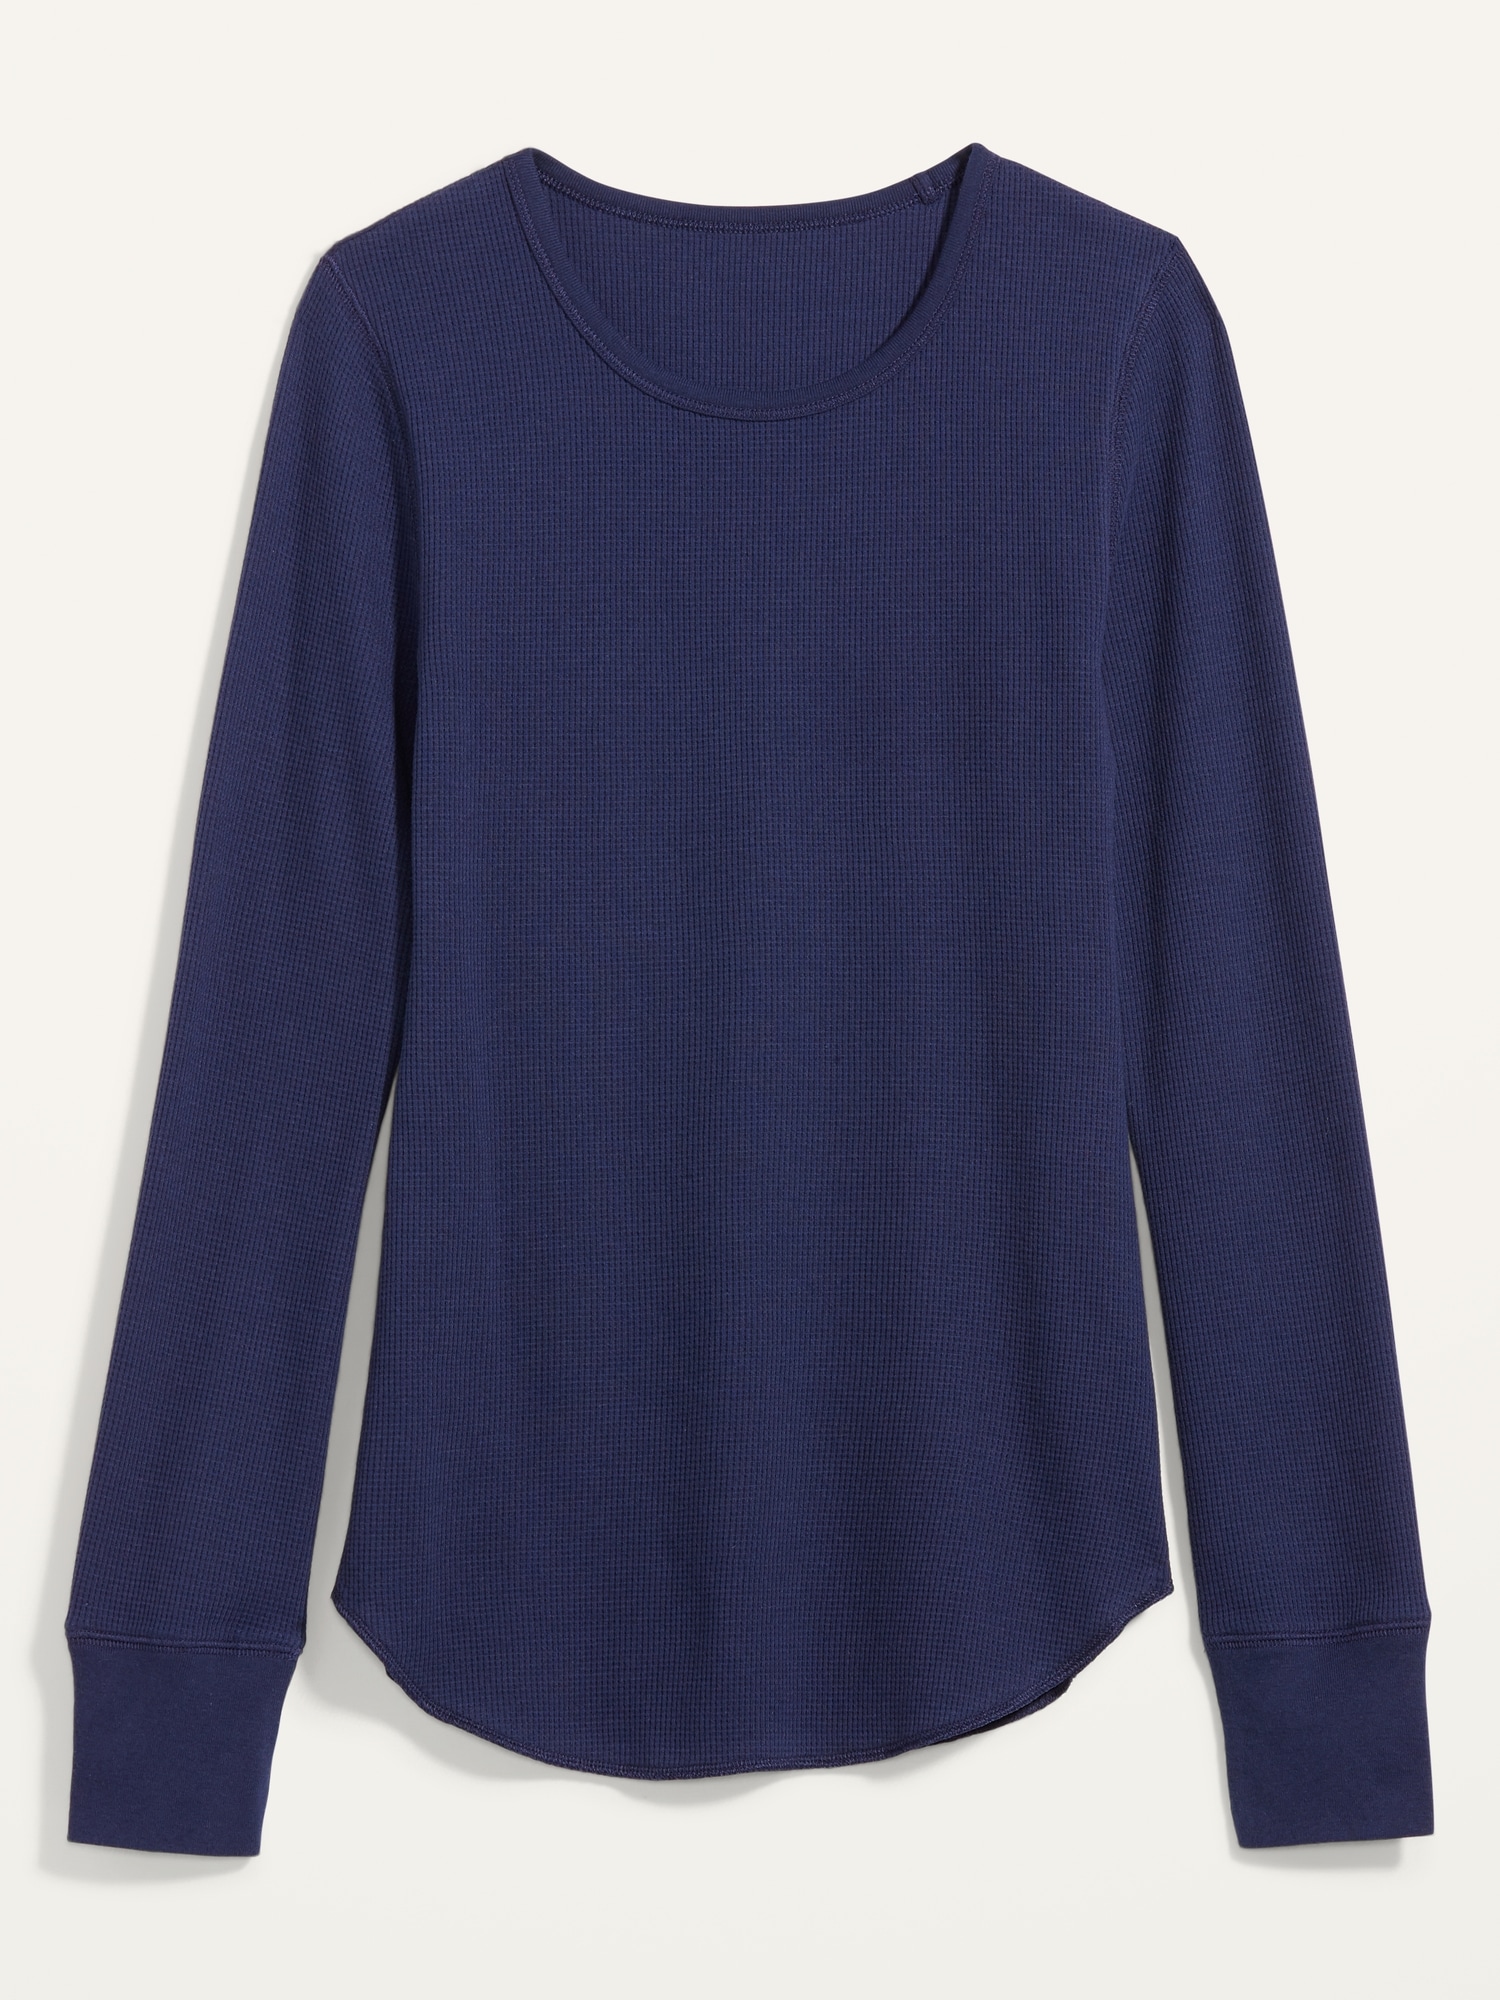 Thermal-Knit Long-Sleeve Tee for Women